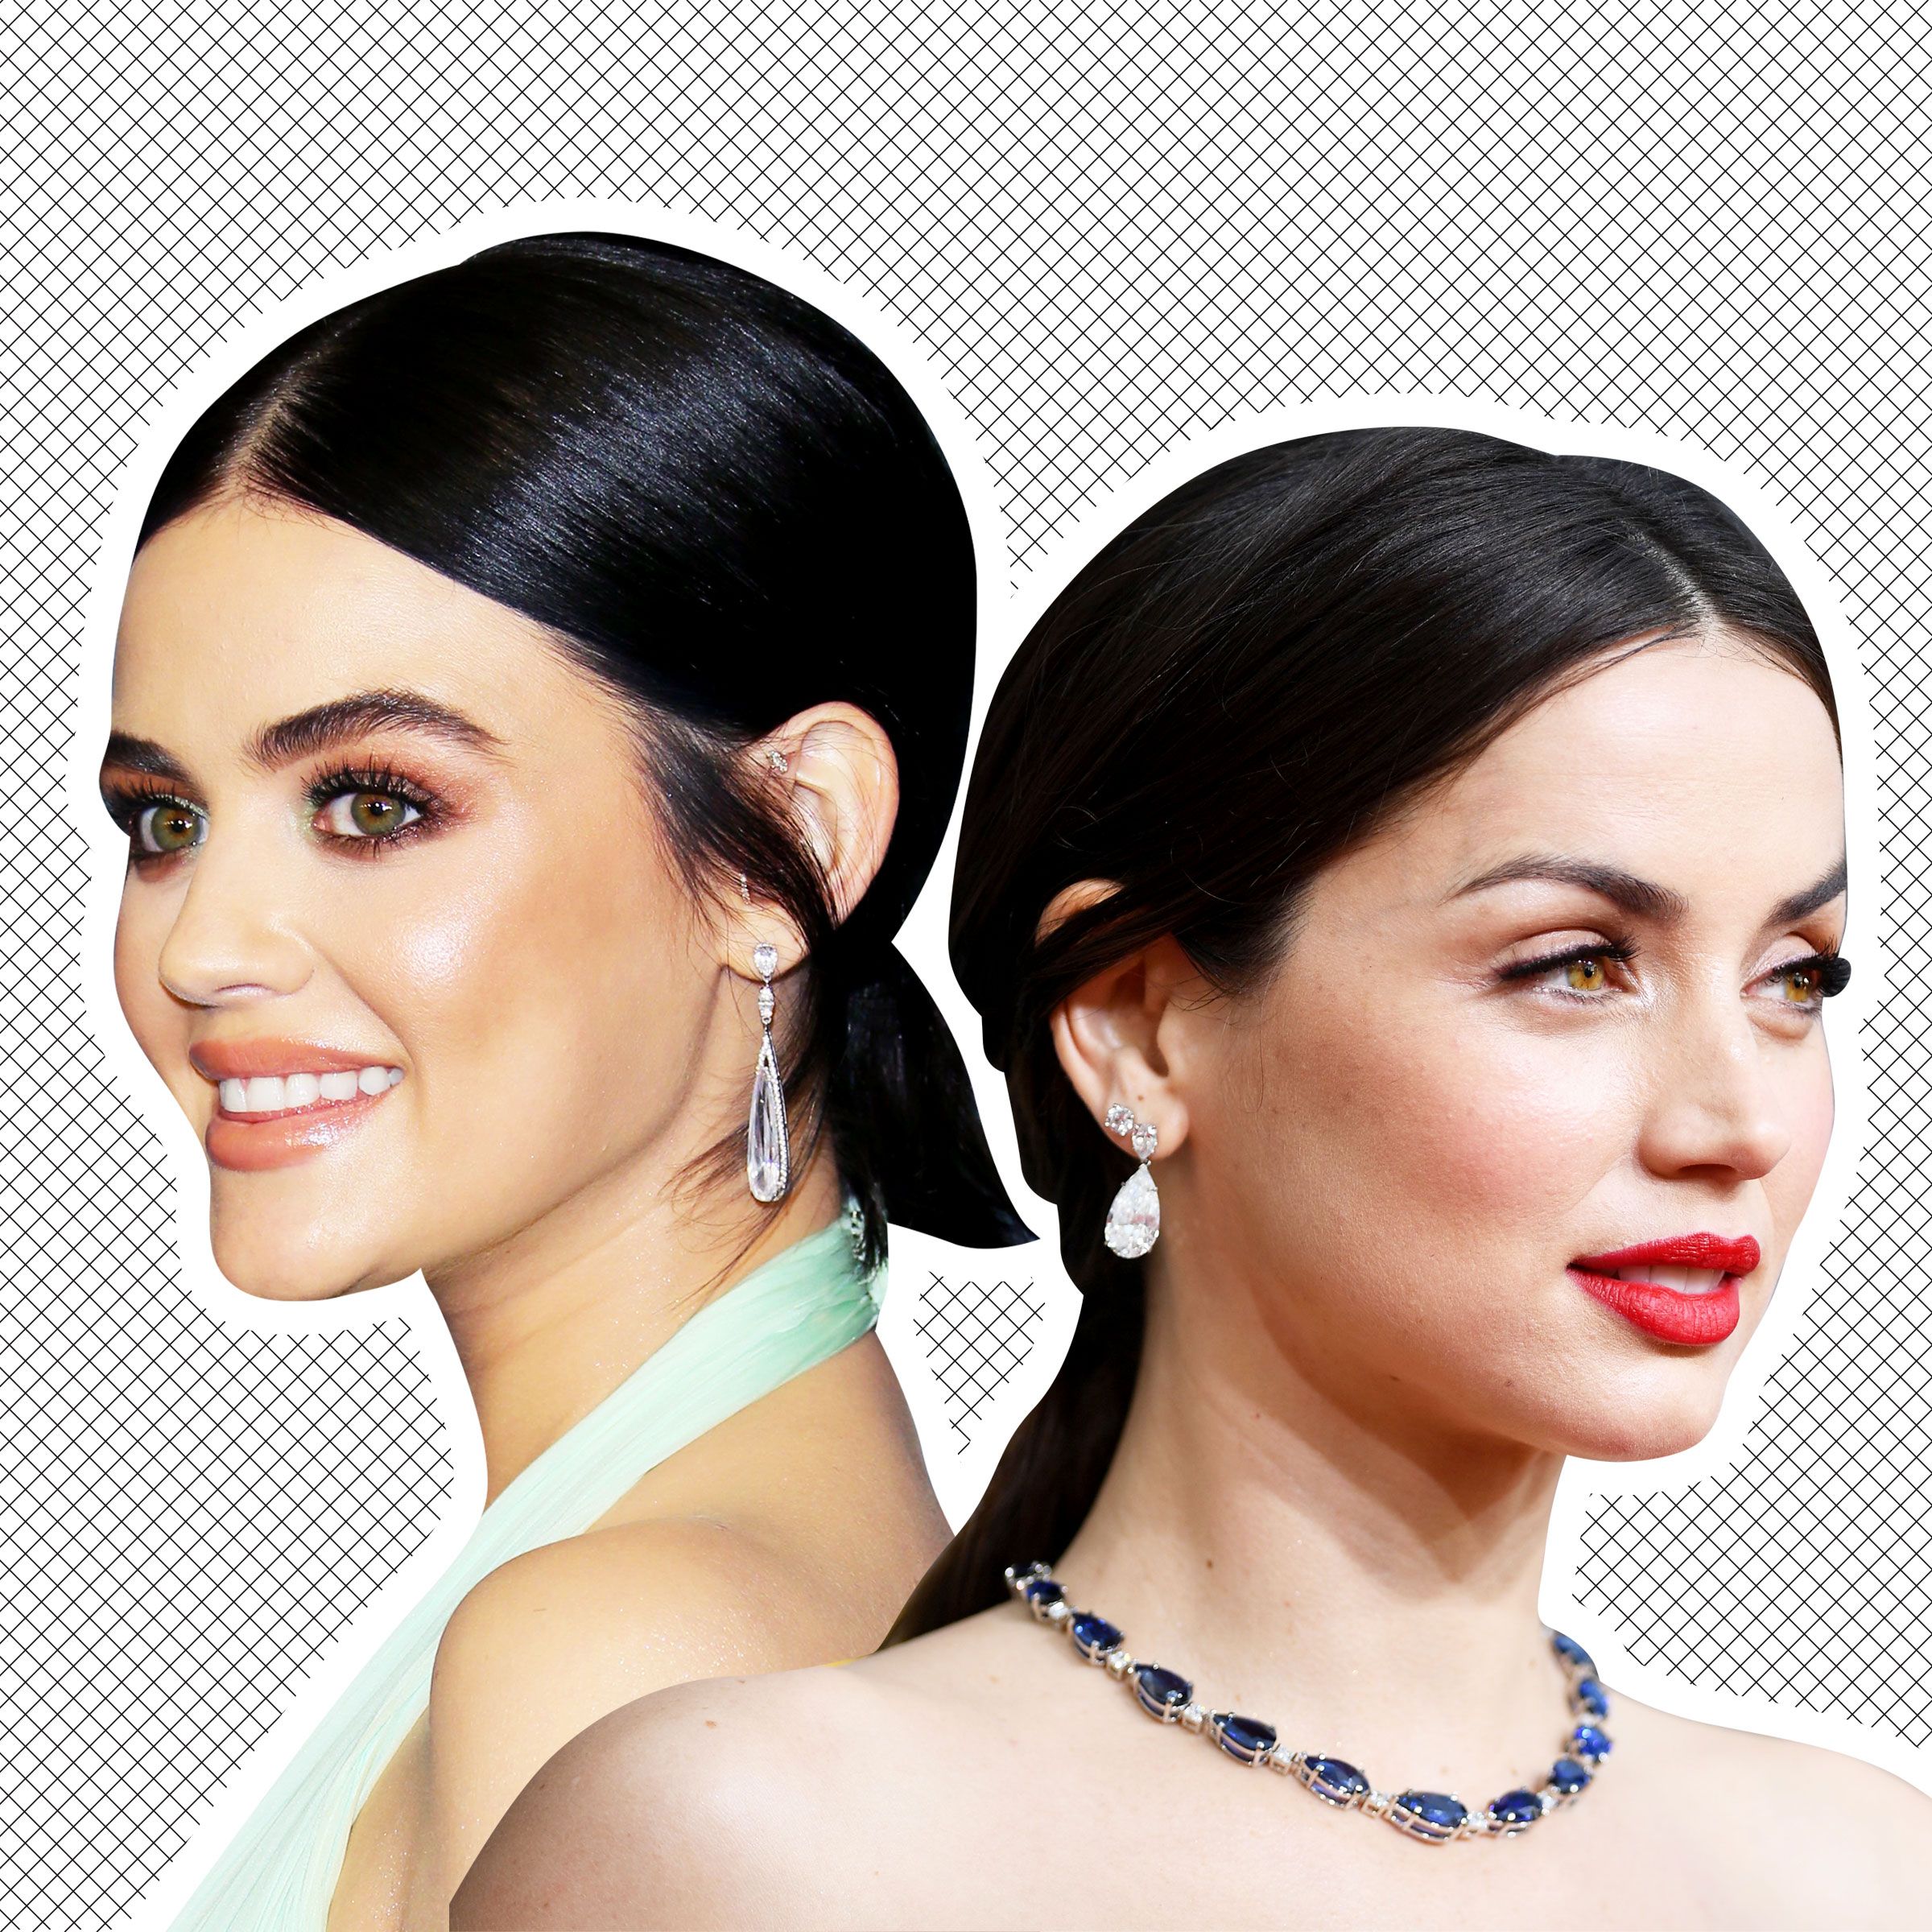 5 Easy Hairstyles That Kind of Hide Your Ears